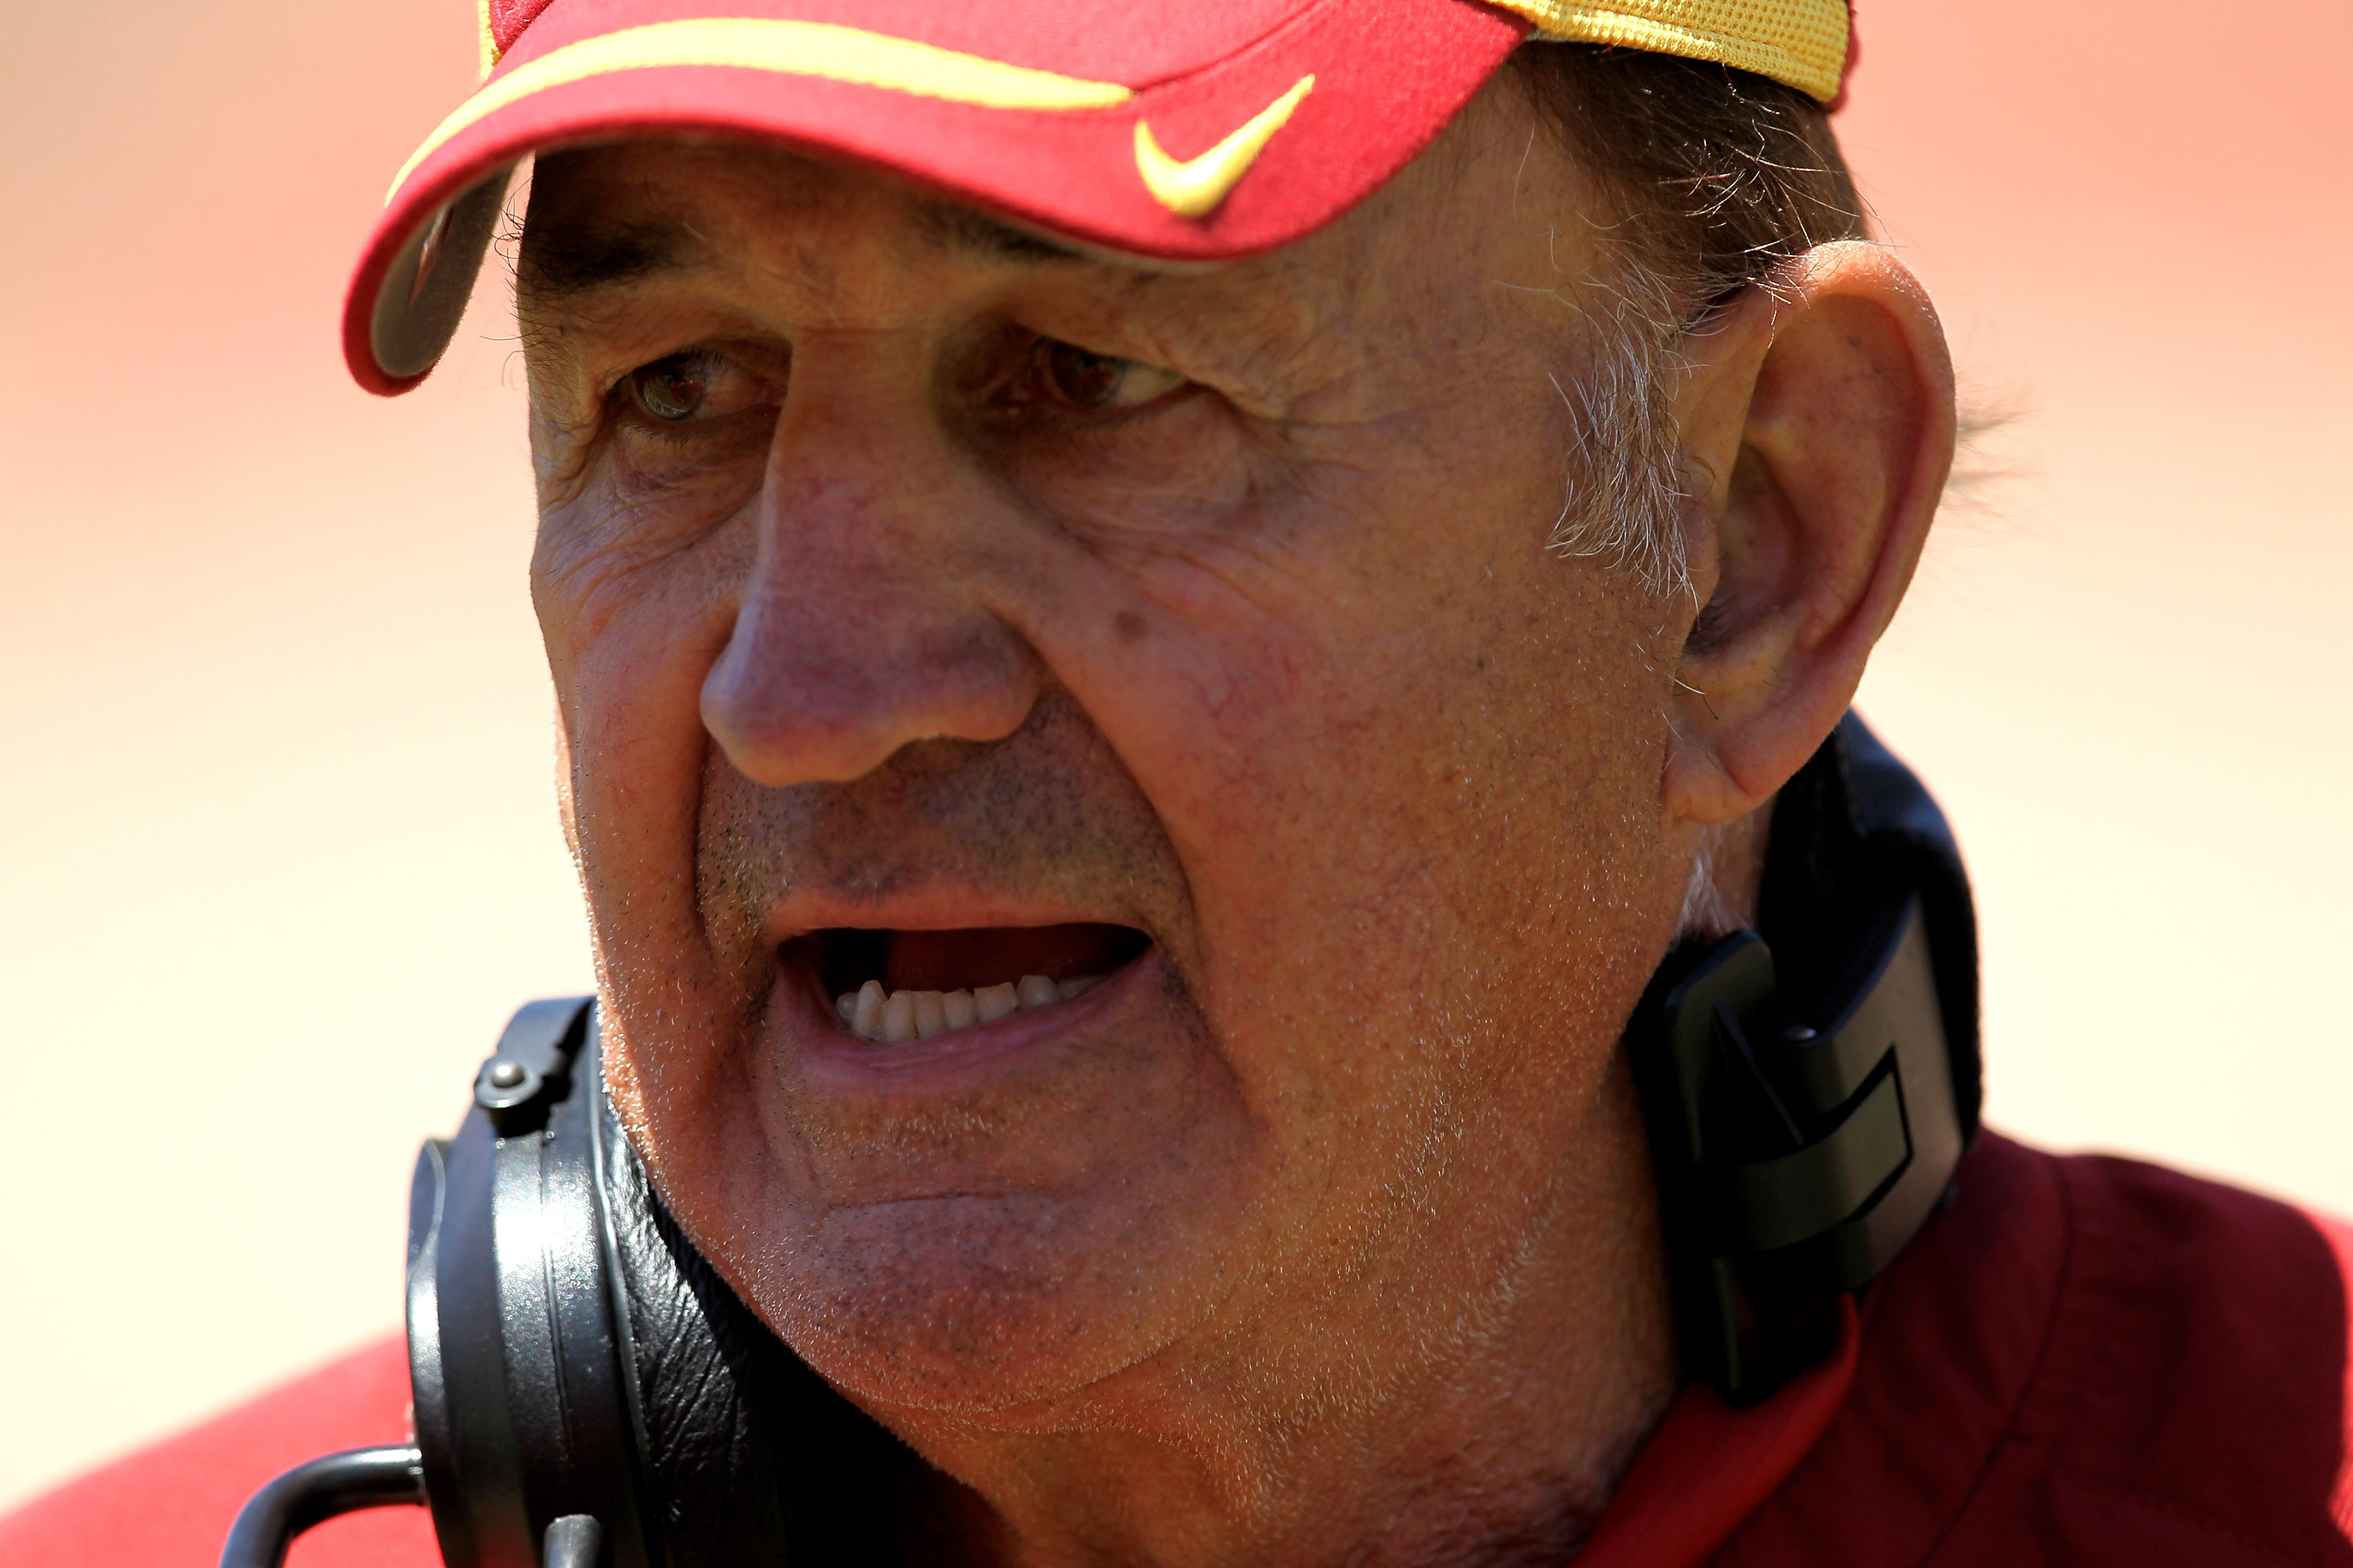 LOS ANGELES, CA - MAY 01:  Assistant head coach Monte Kiffin on the sidelines during the USC Trojans spring game on  May 1, 2010 at the Los Angeles Memorial Coliseum in Los Angeles, California.  (Photo by Stephen Dunn/Getty Images)